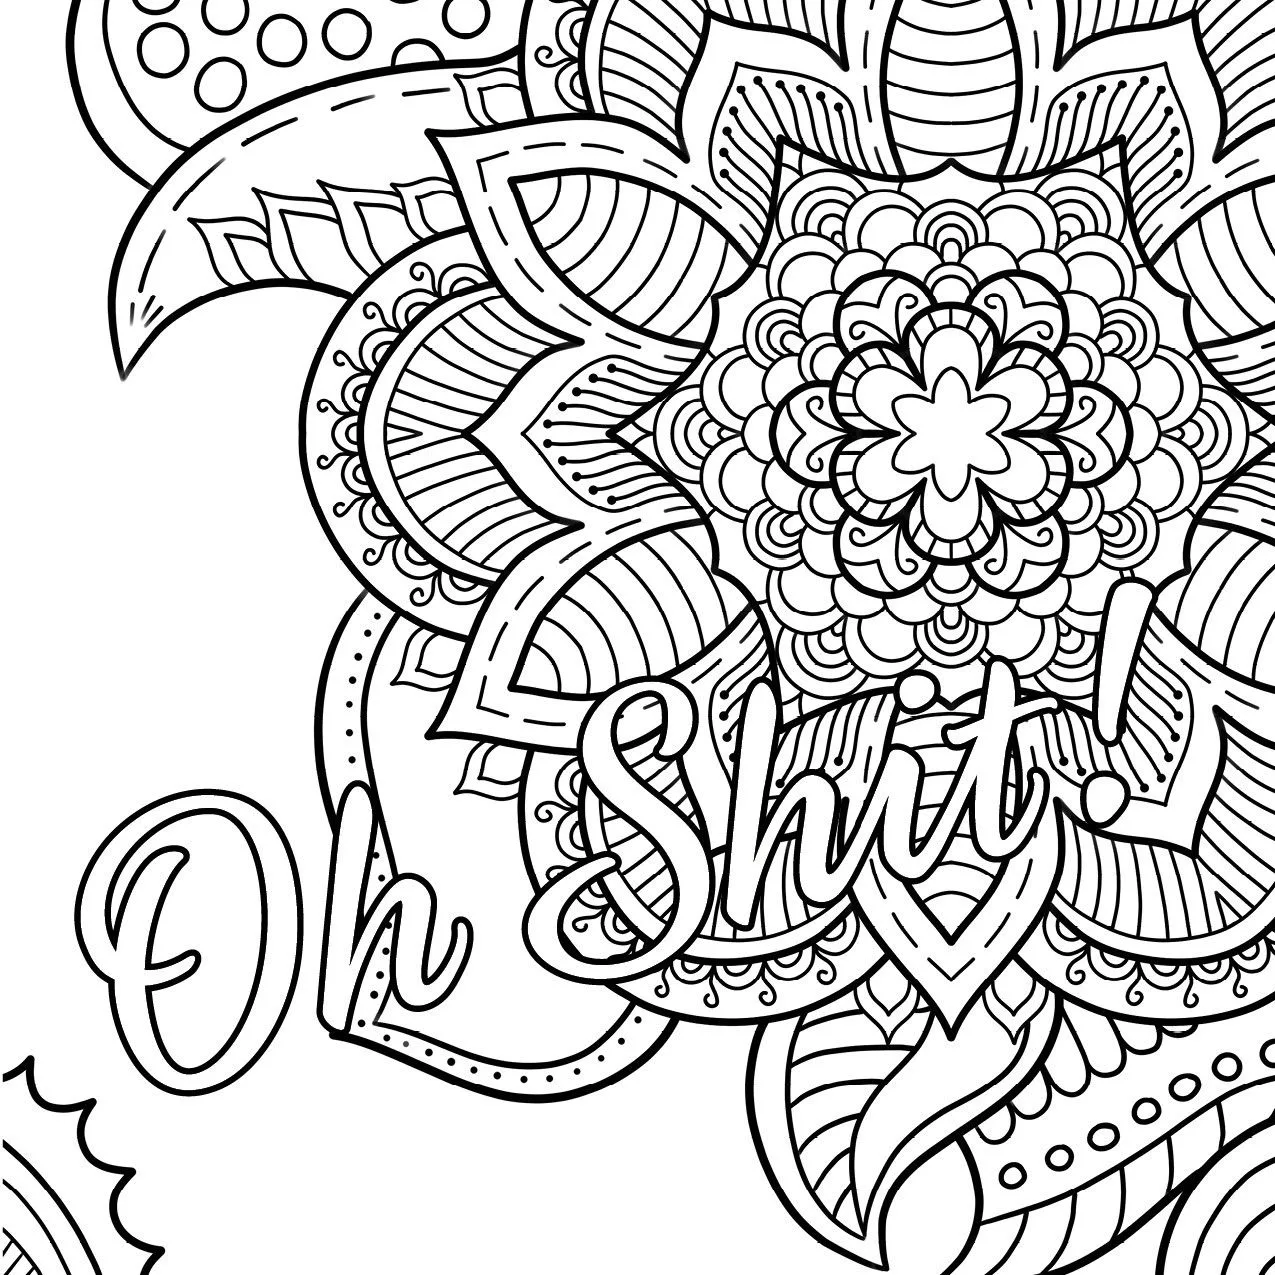 Pin em Coloring pictures